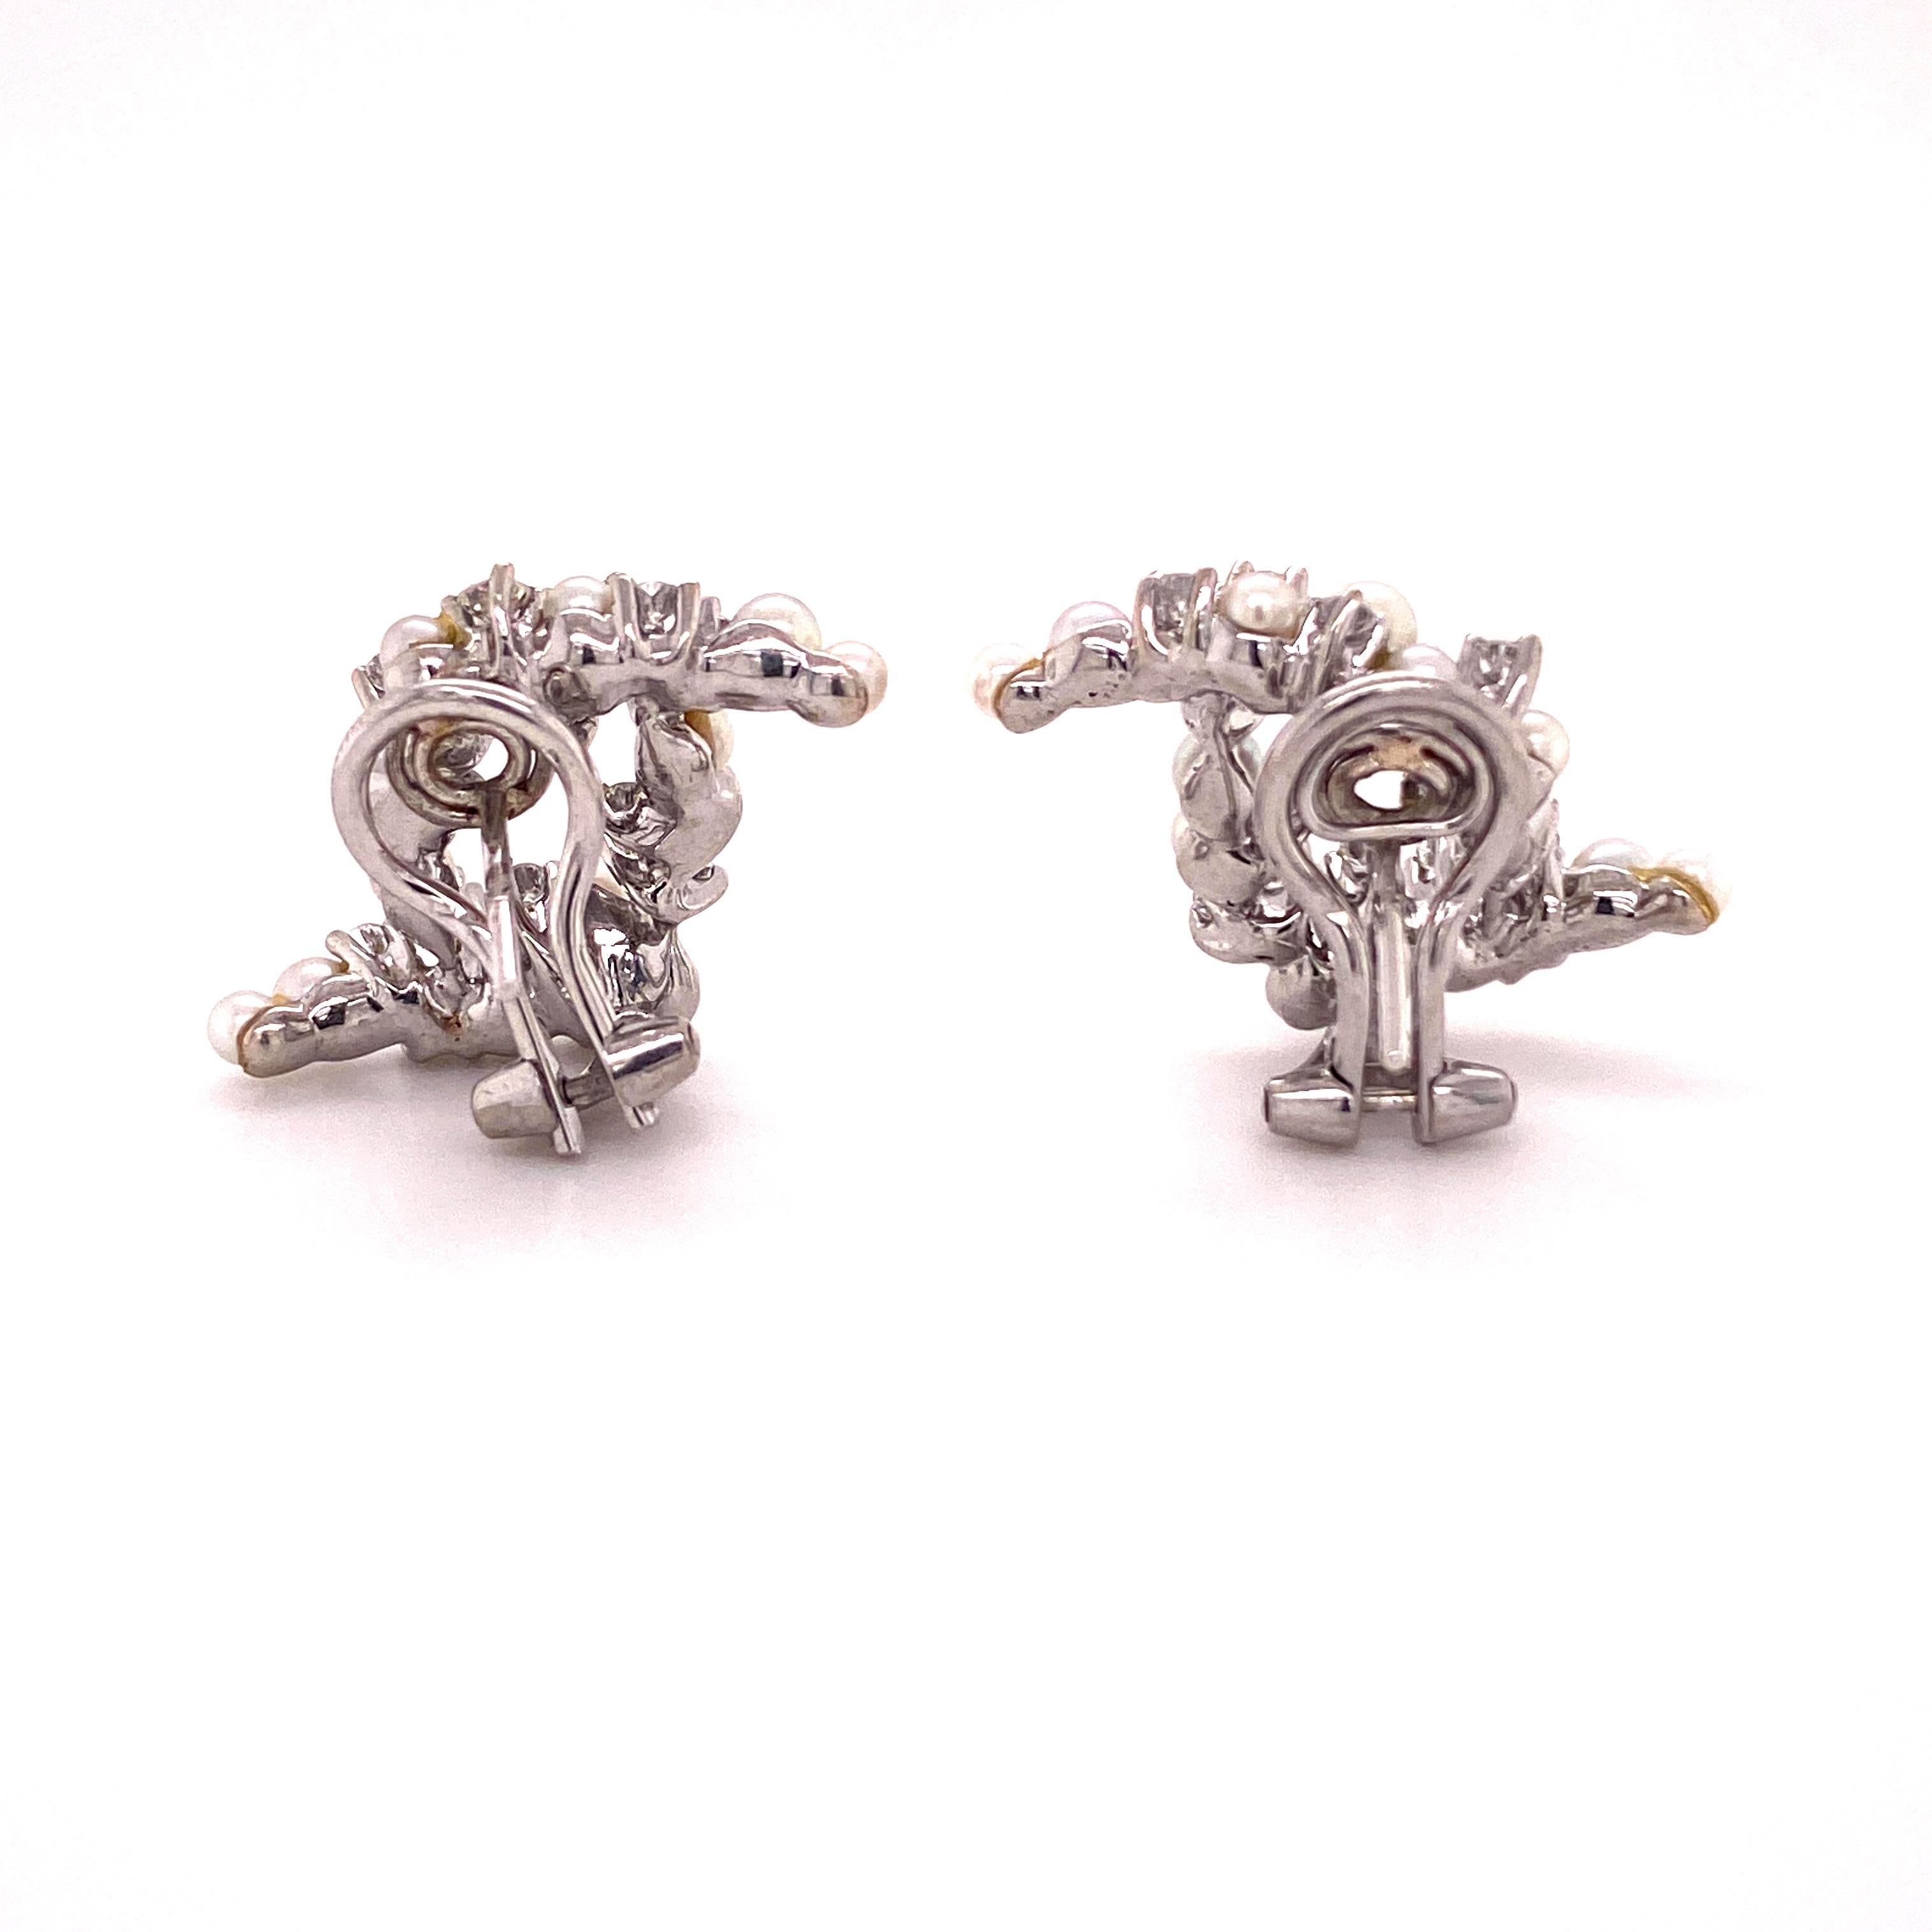 Brilliant Cut Diamond and Cultured Pearl Earrings in White Gold 750